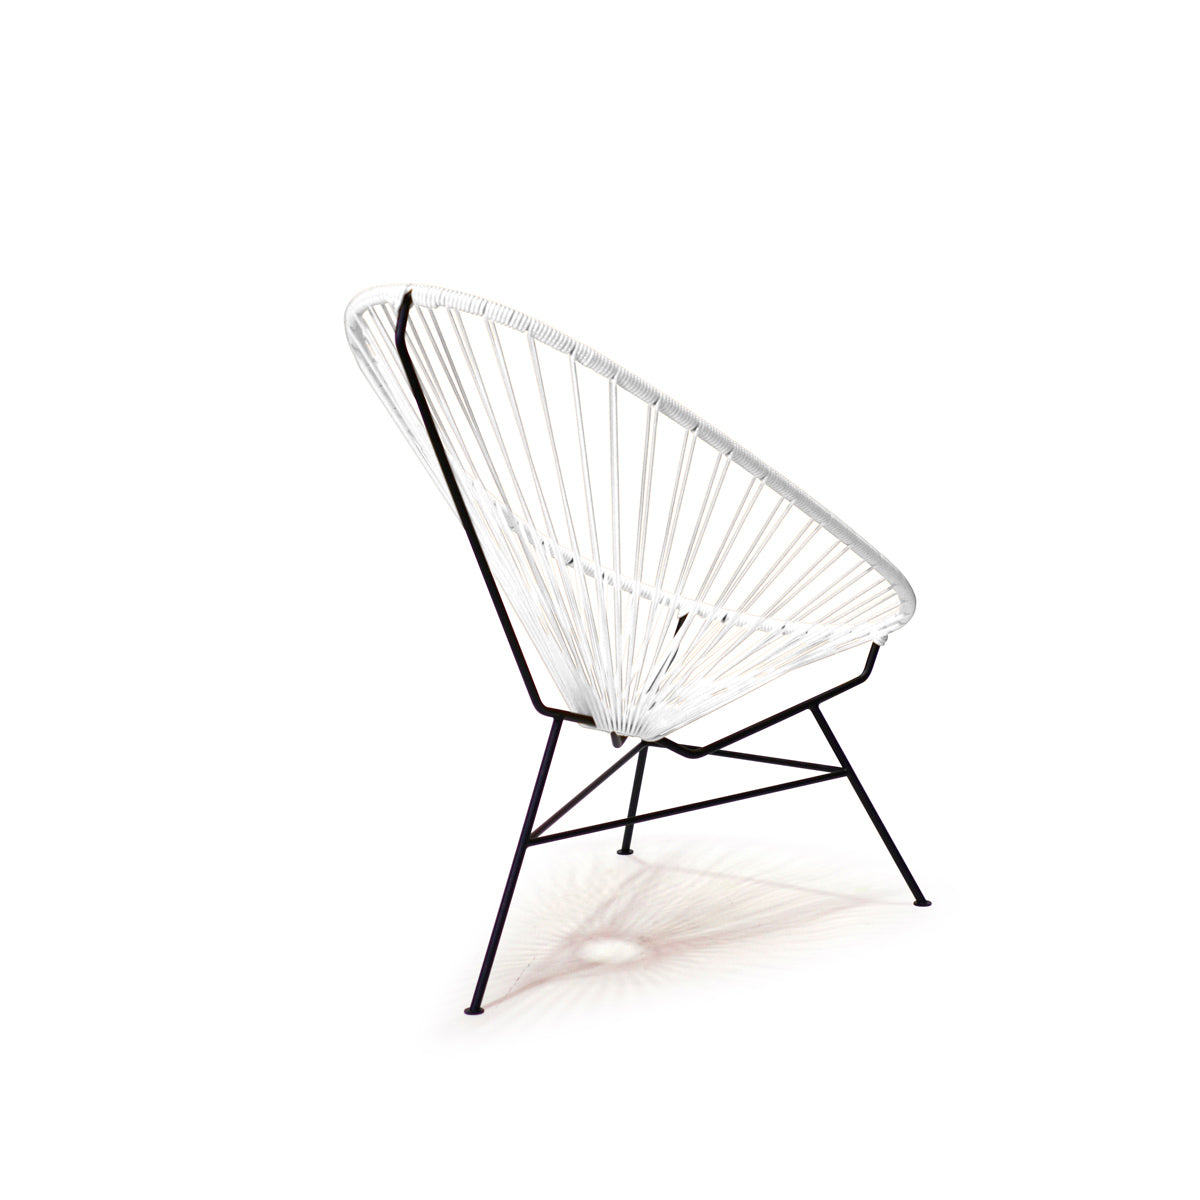 Acapulco Chair White　アカプルコチェア